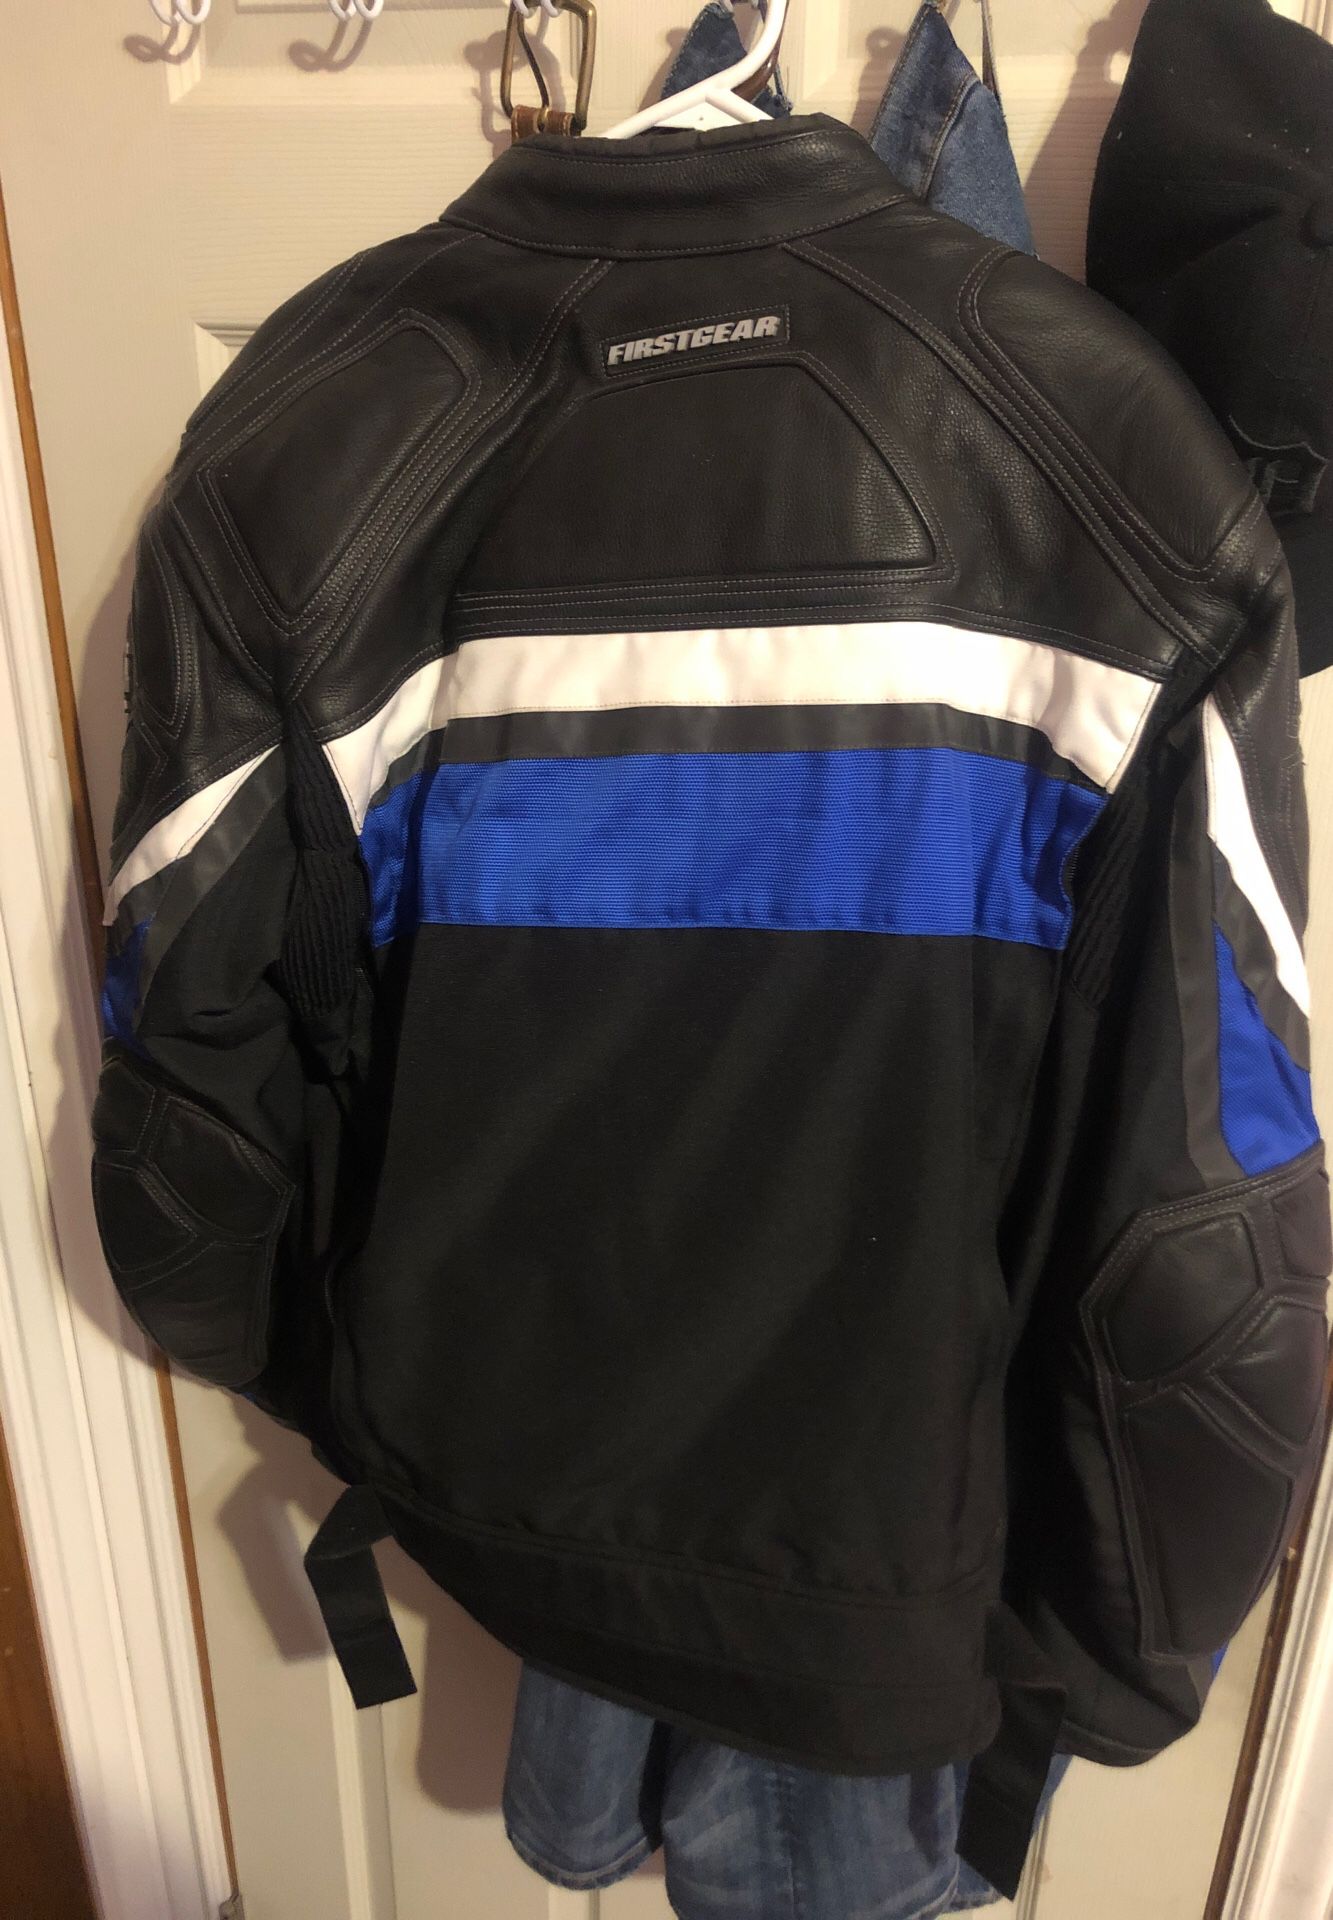 Motorcycle Jacket first gear high end Jacket size Large